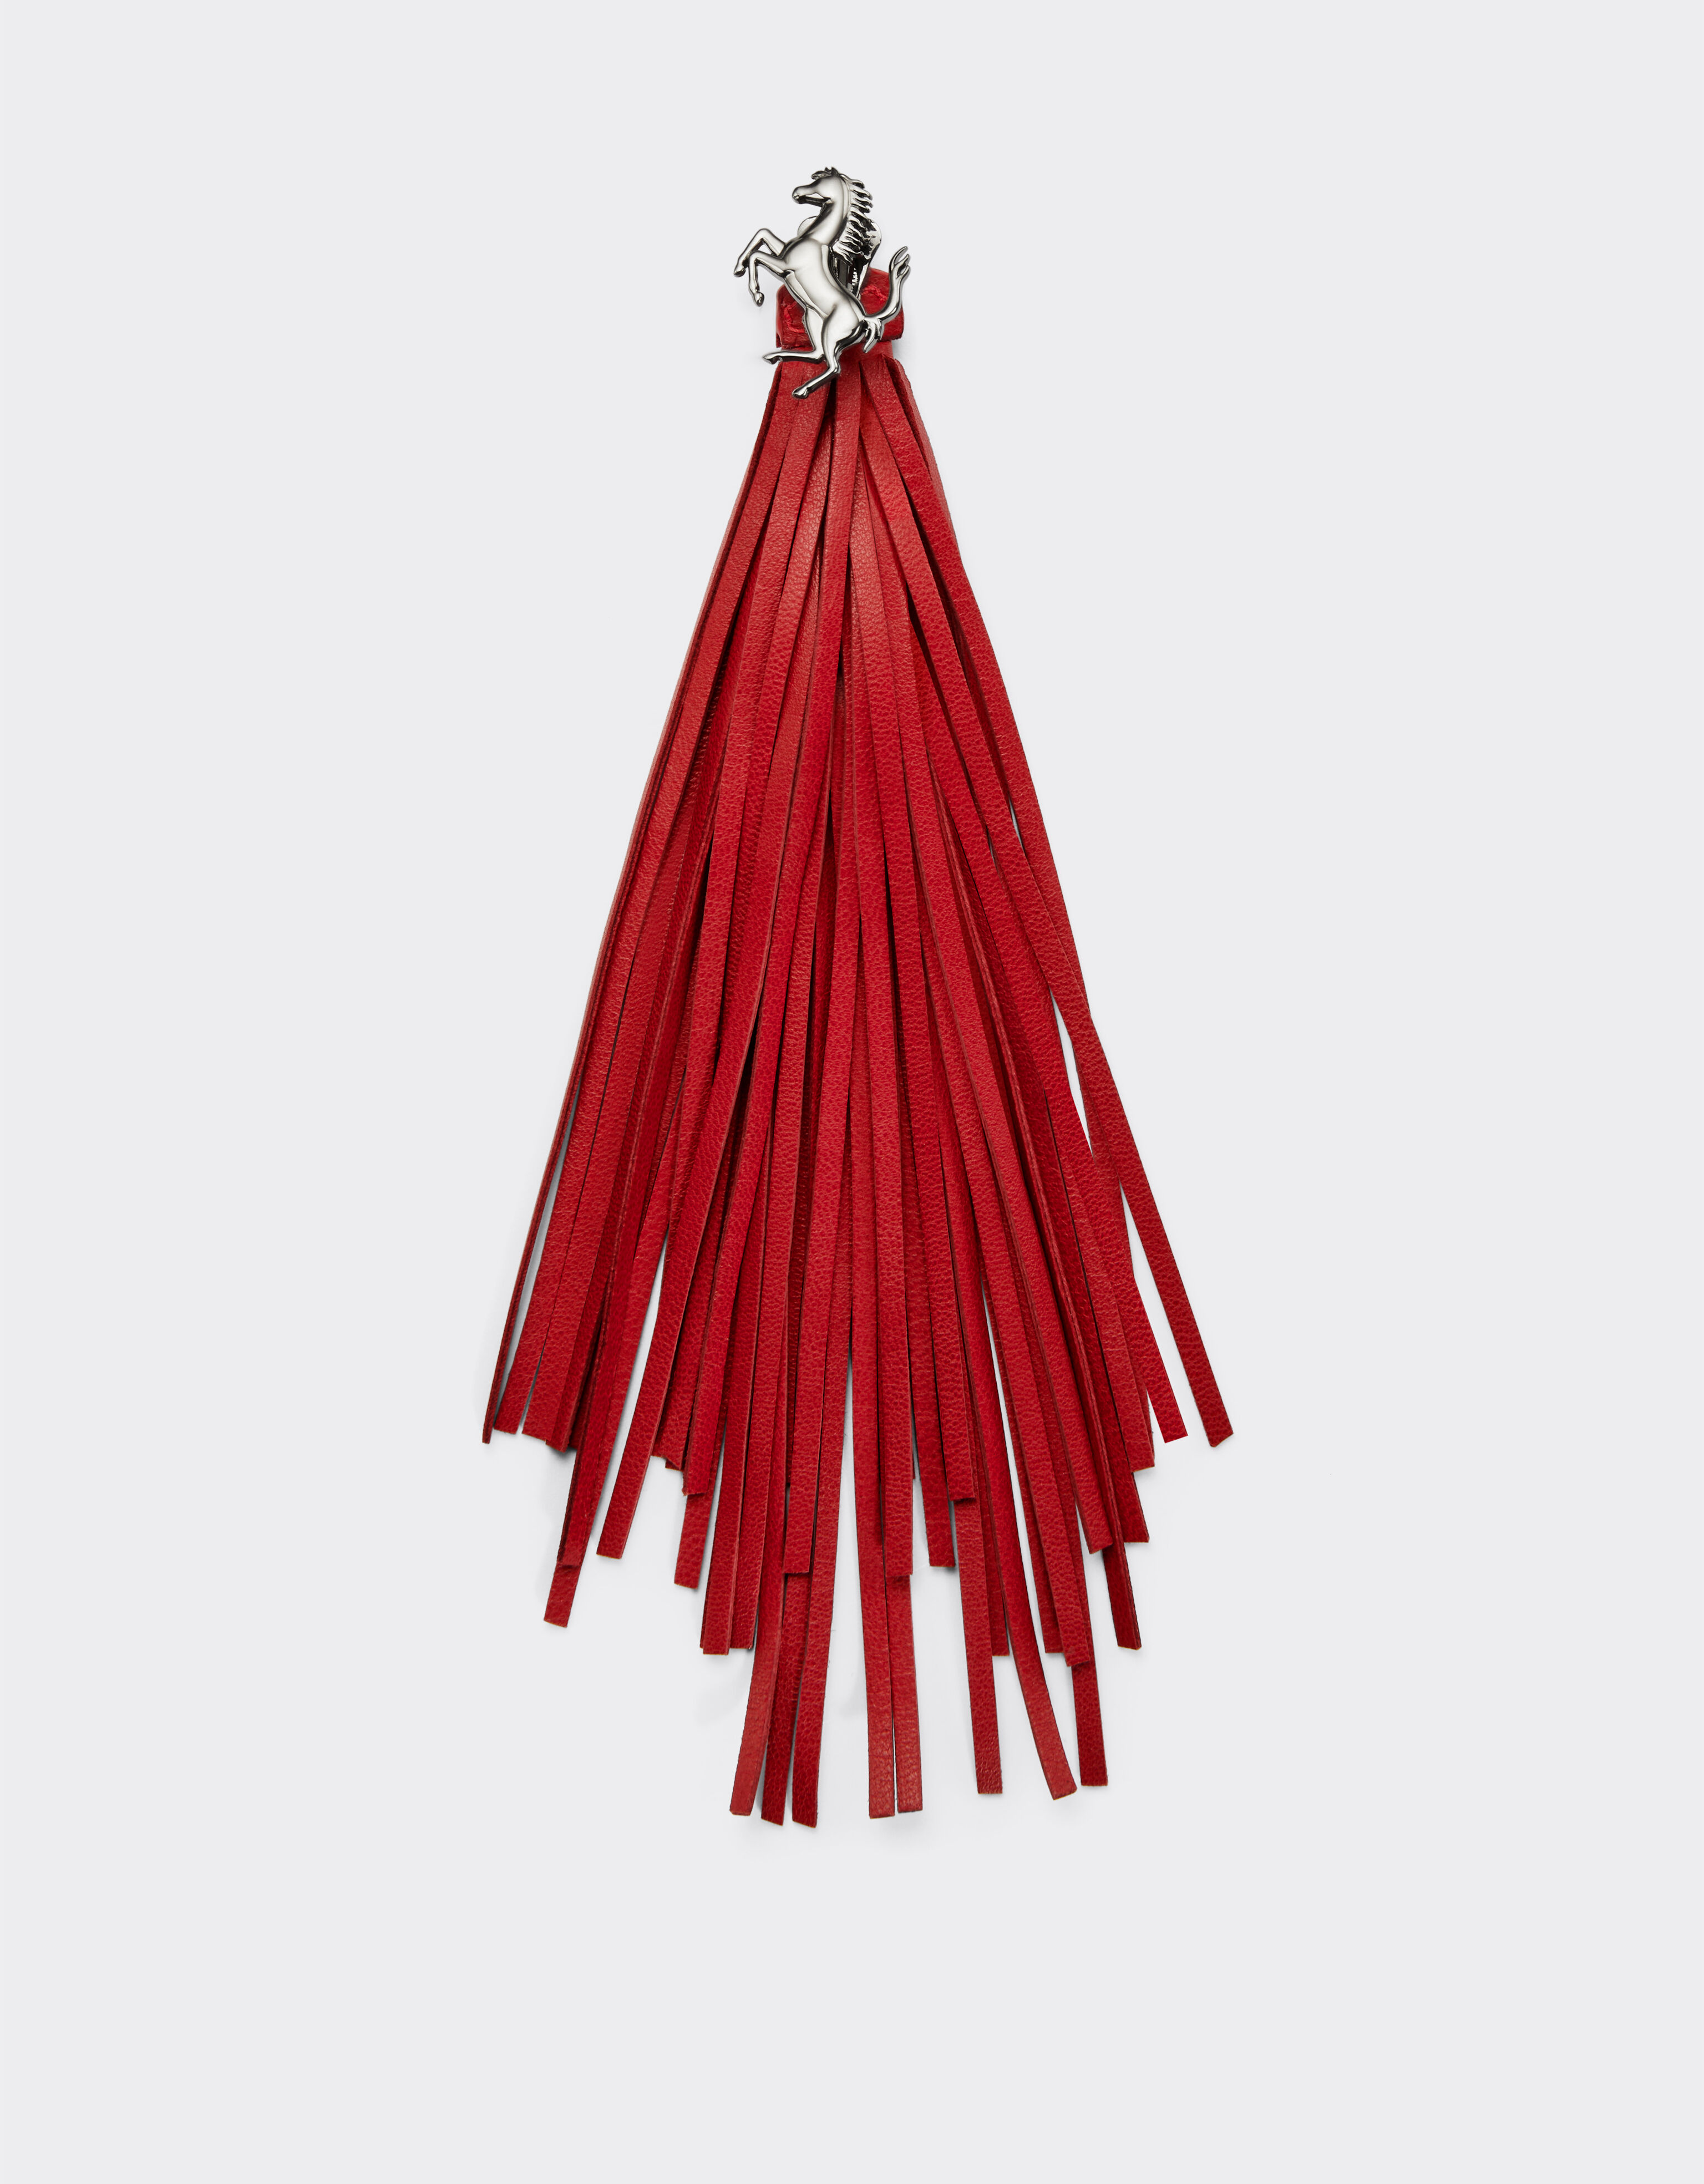 Ferrari Earrings with Prancing Horse detail and leather tassel Rosso Dino 20132f